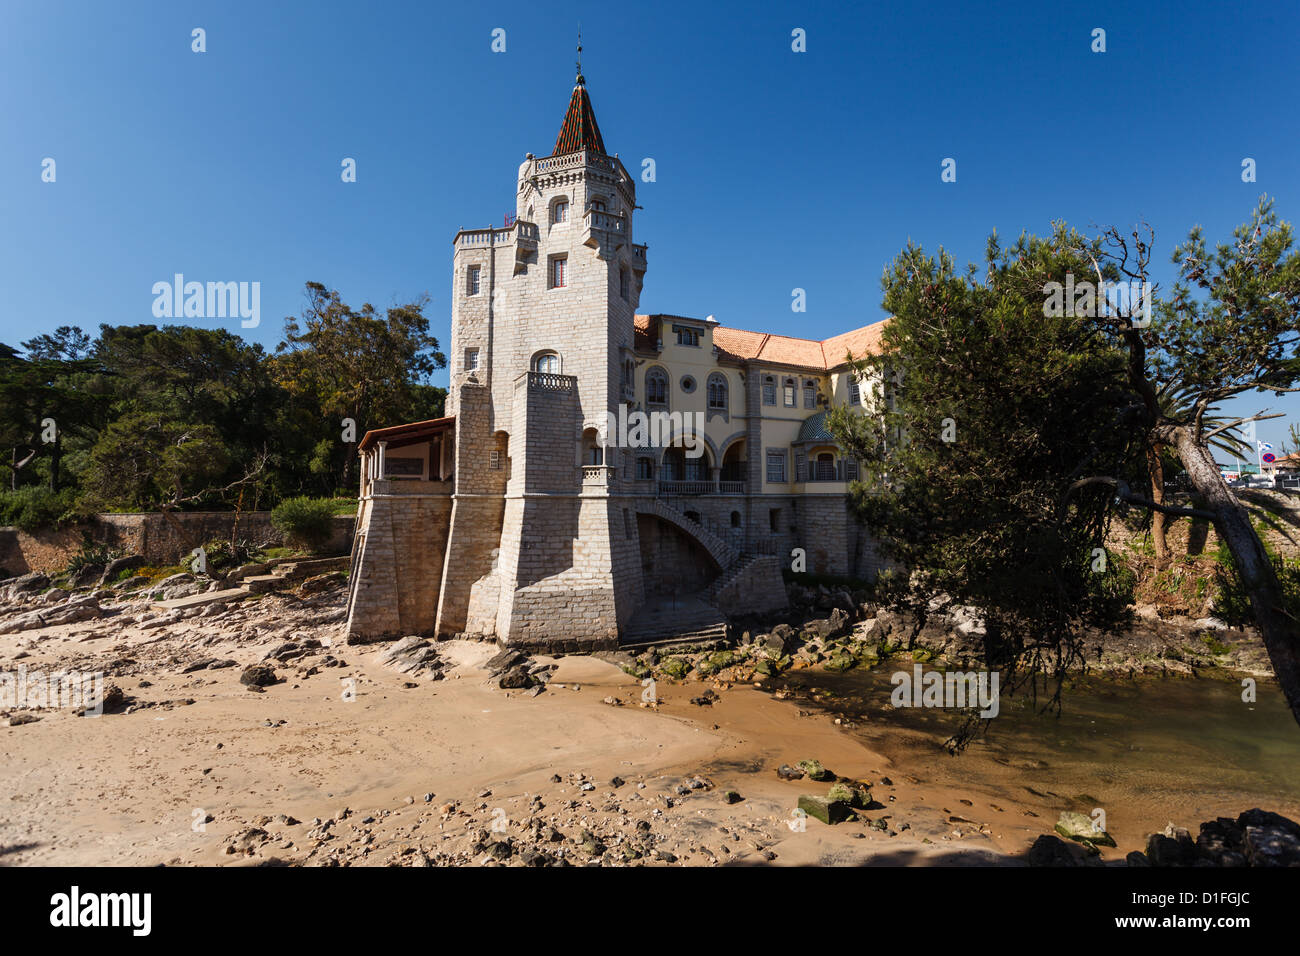 Estoril, Portugal beach with beautiful home with turret and castle tower Stock Photo